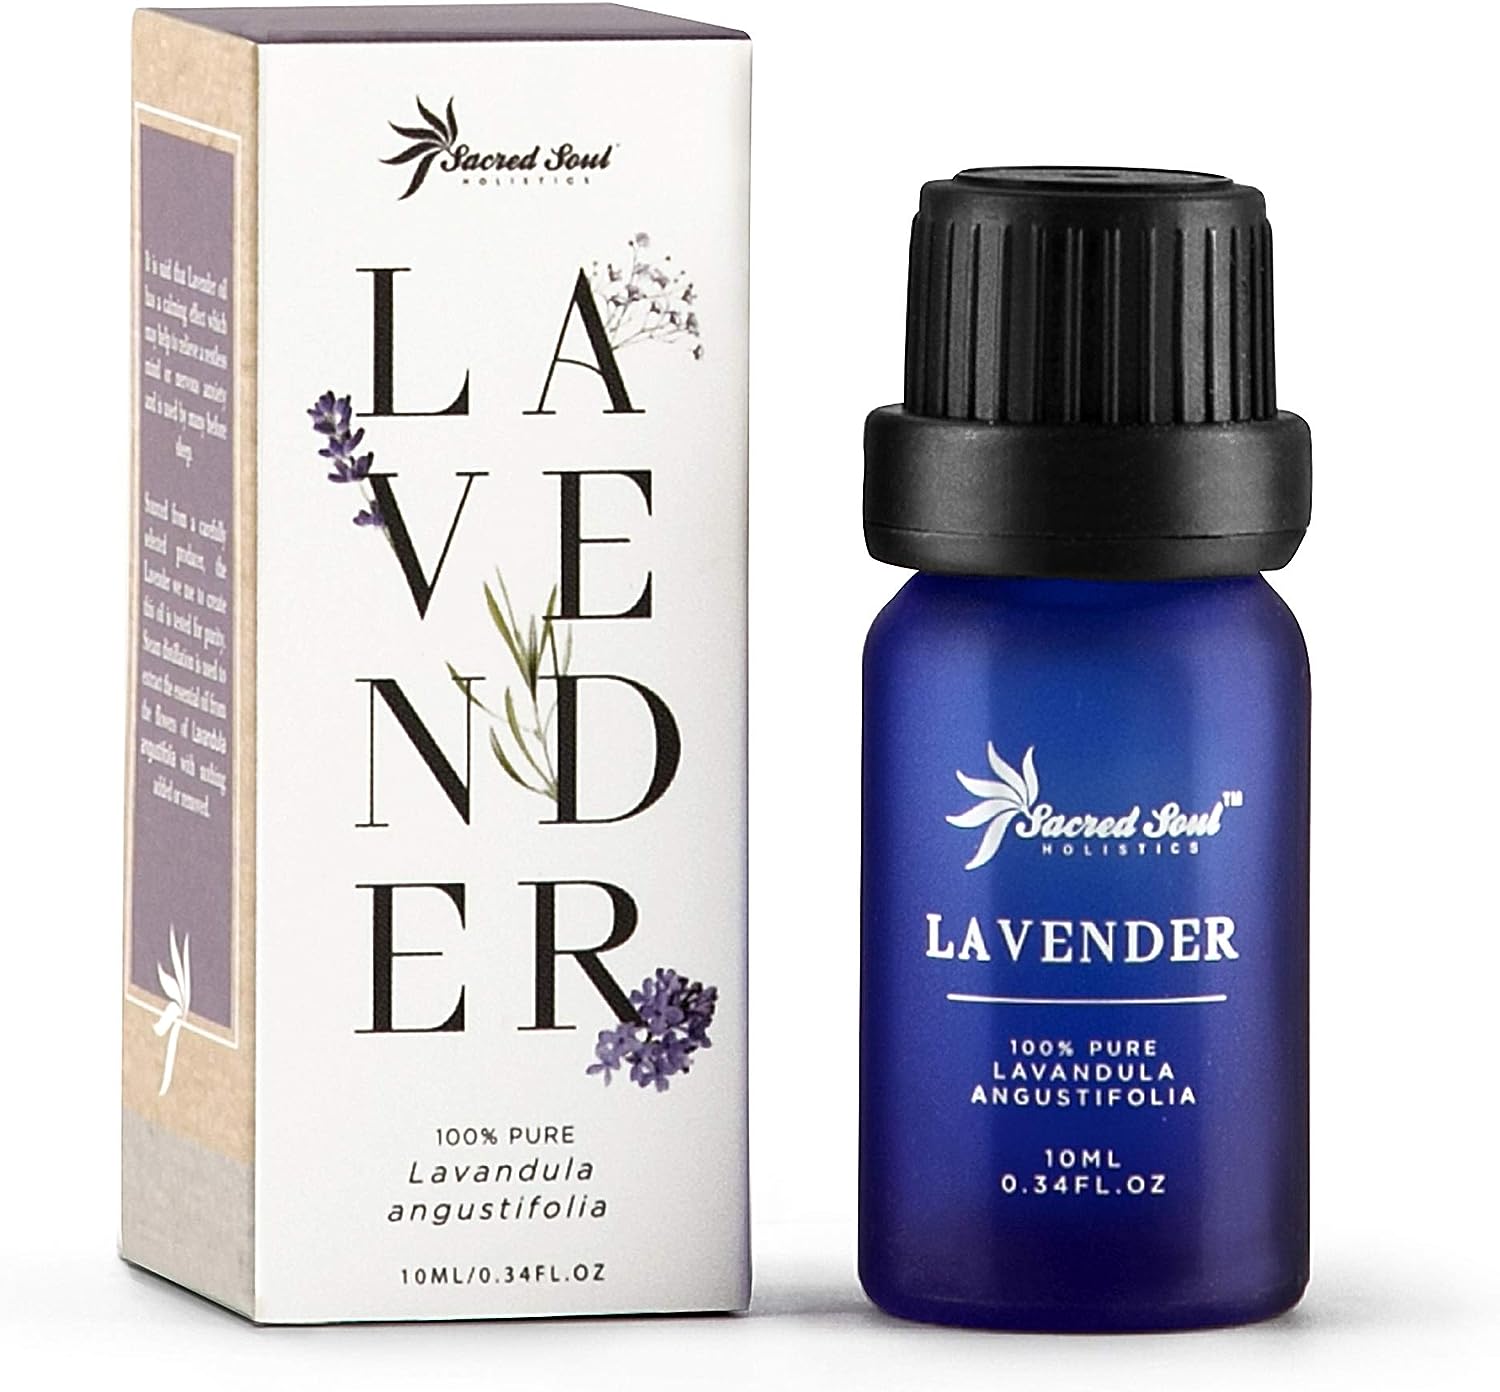 Sacred Soul 100% Pure Lavender Essential Oil - 10ml - Organically Grown - GCMS Tested - Calming & Relaxing - Perfect For Aromatherapy, Diffuser or Burner, Candle & Soap Making, Skin